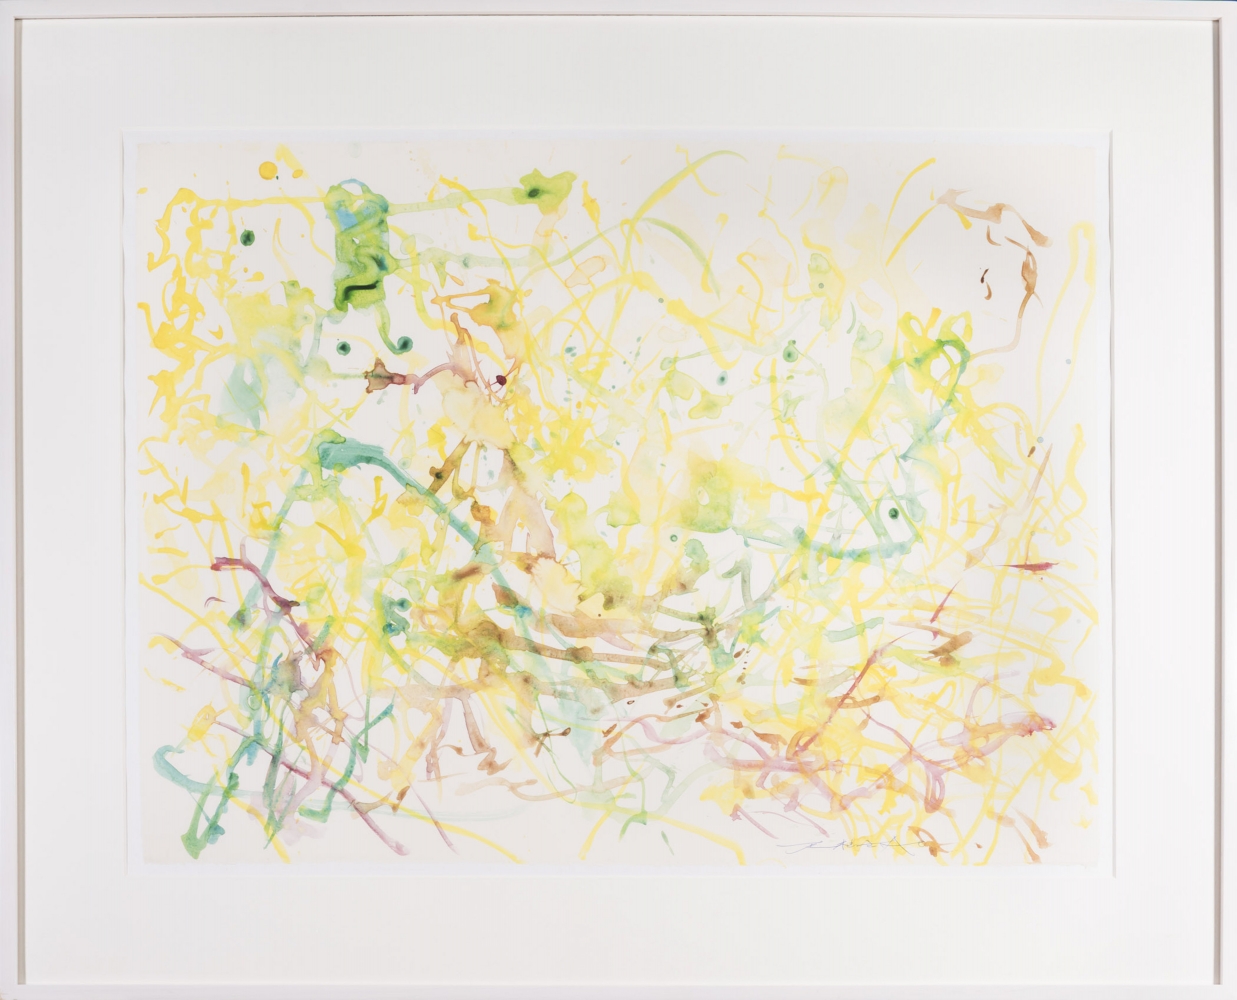 Untitled, 2005

watercolor on paper

22 3/8 x 29 7/8 in. / 57 x 76 cm